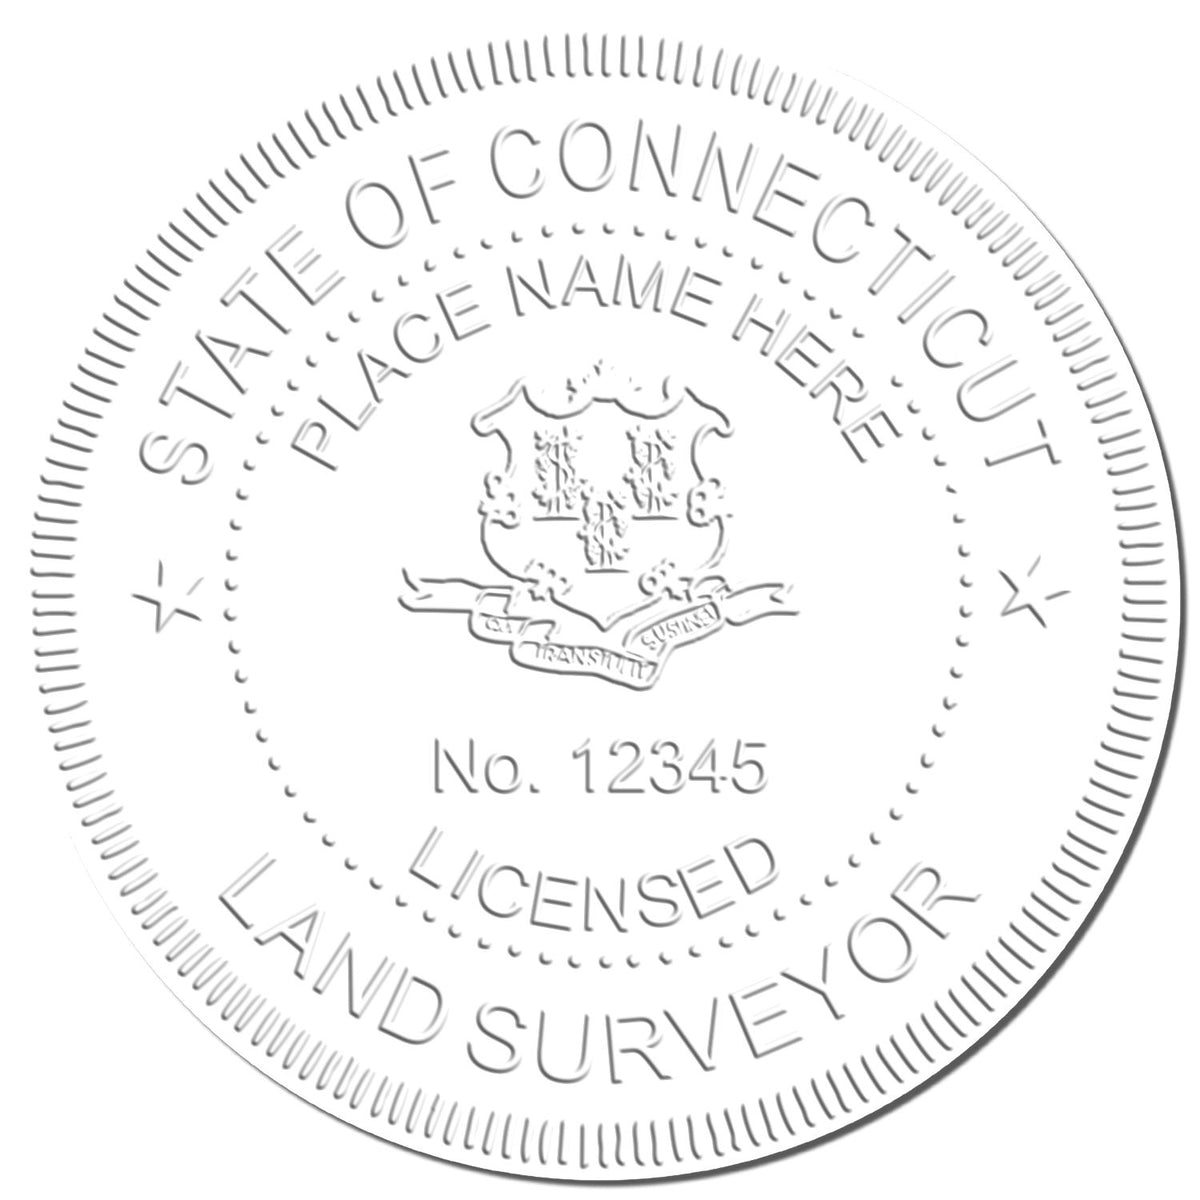 This paper is stamped with a sample imprint of the Gift Connecticut Land Surveyor Seal, signifying its quality and reliability.